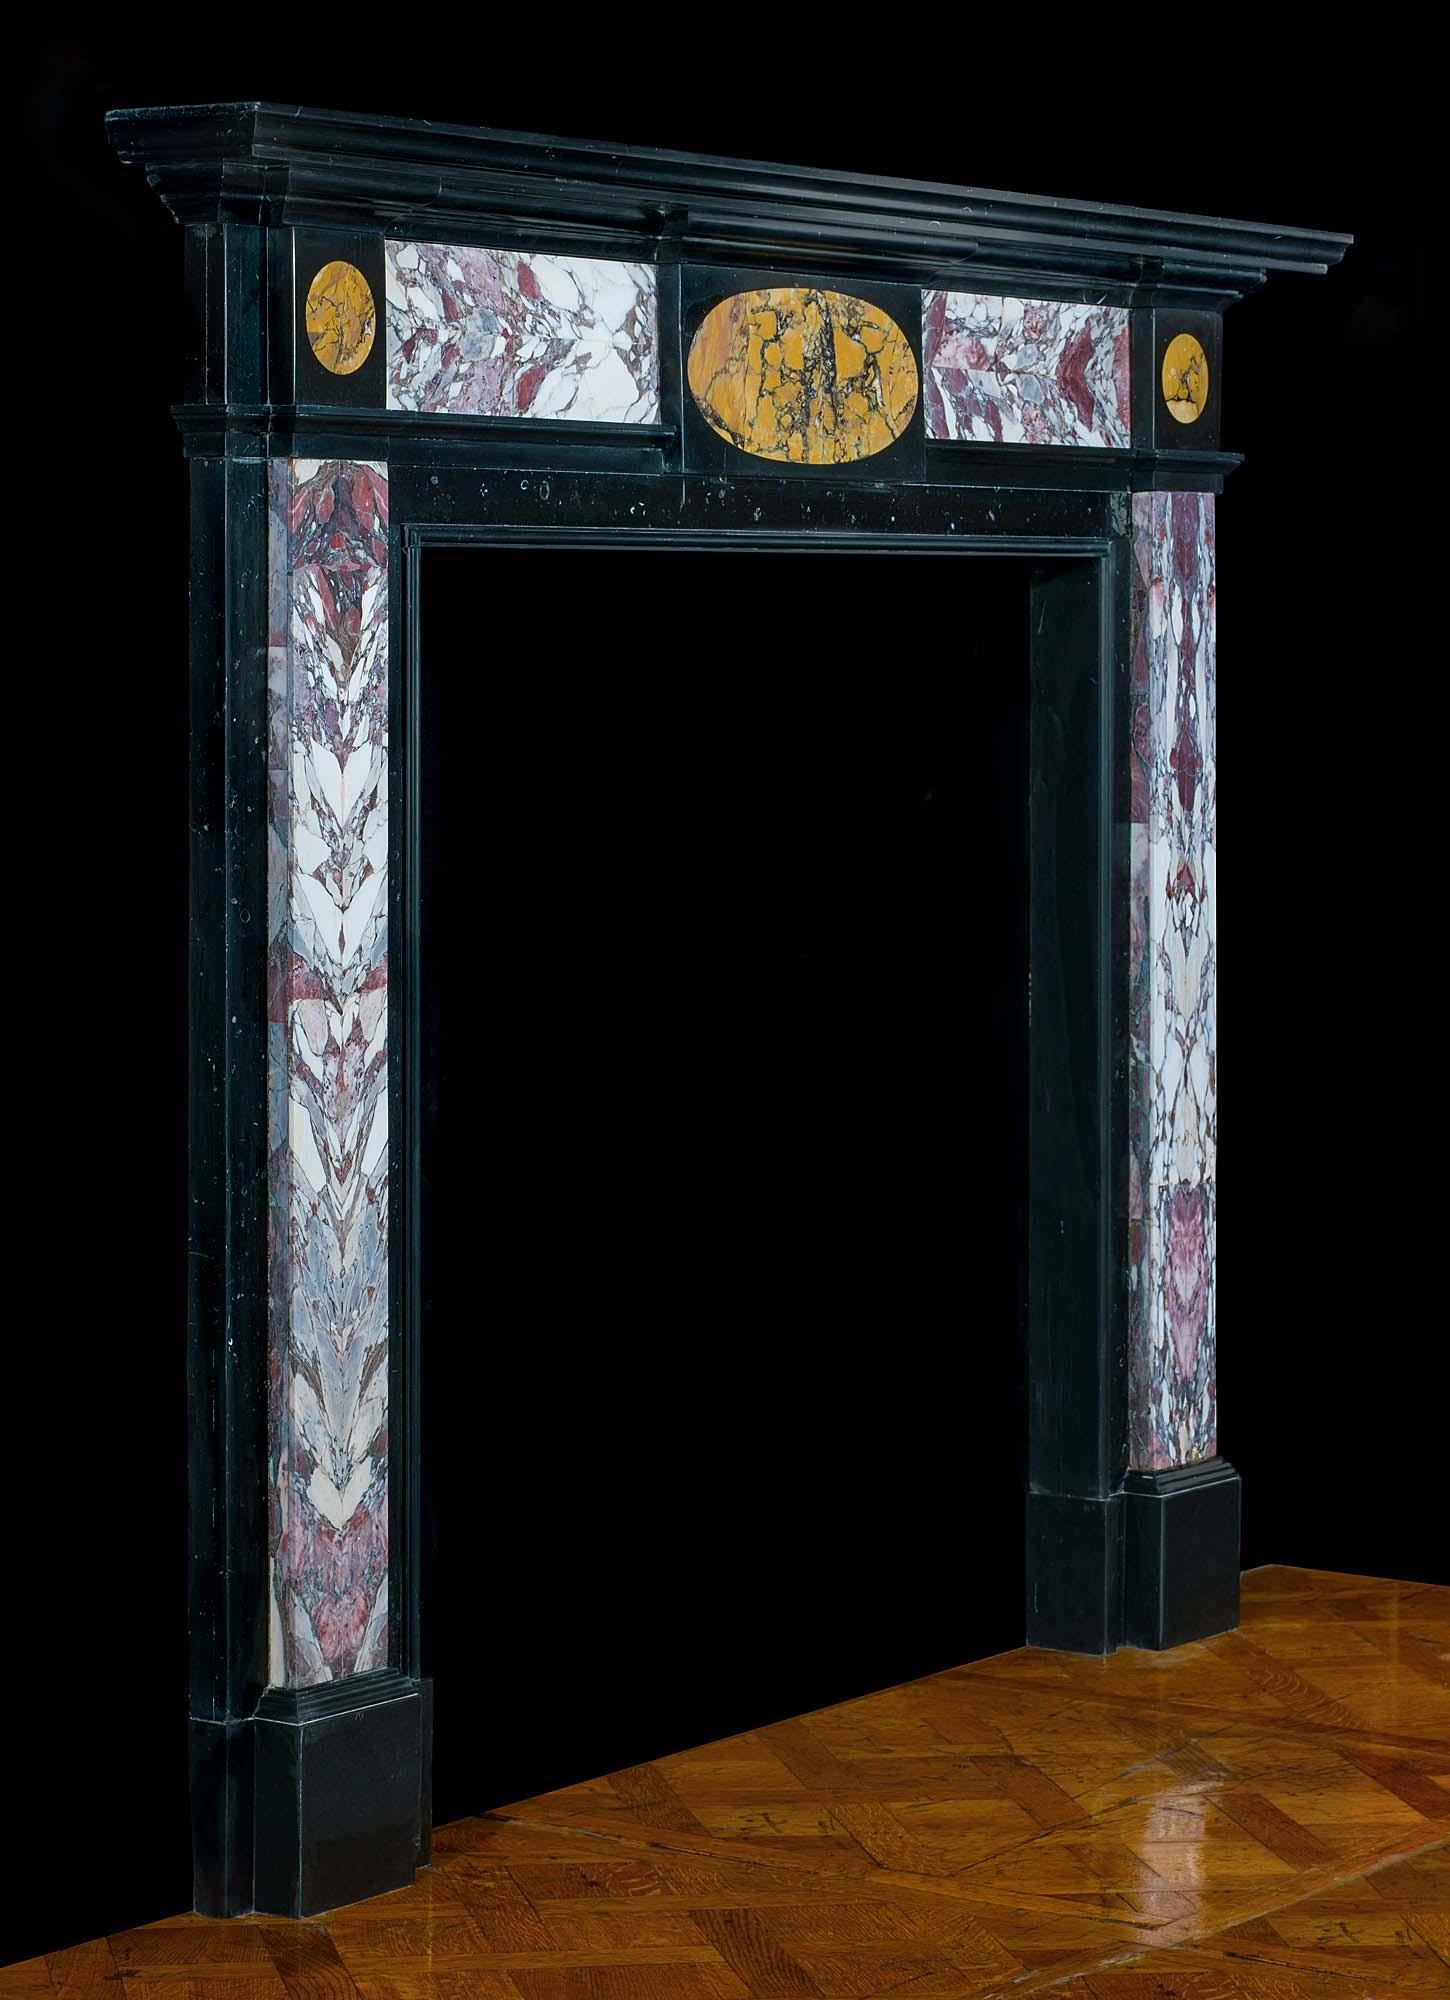 A very smart English Regency specimen marble chimneypiece in Kilkenny black fossil marble inlaid with Breche Violette marble panels which have been cut and opened like a book to reveal symetrical veining. The oval plaque on the frieze and the